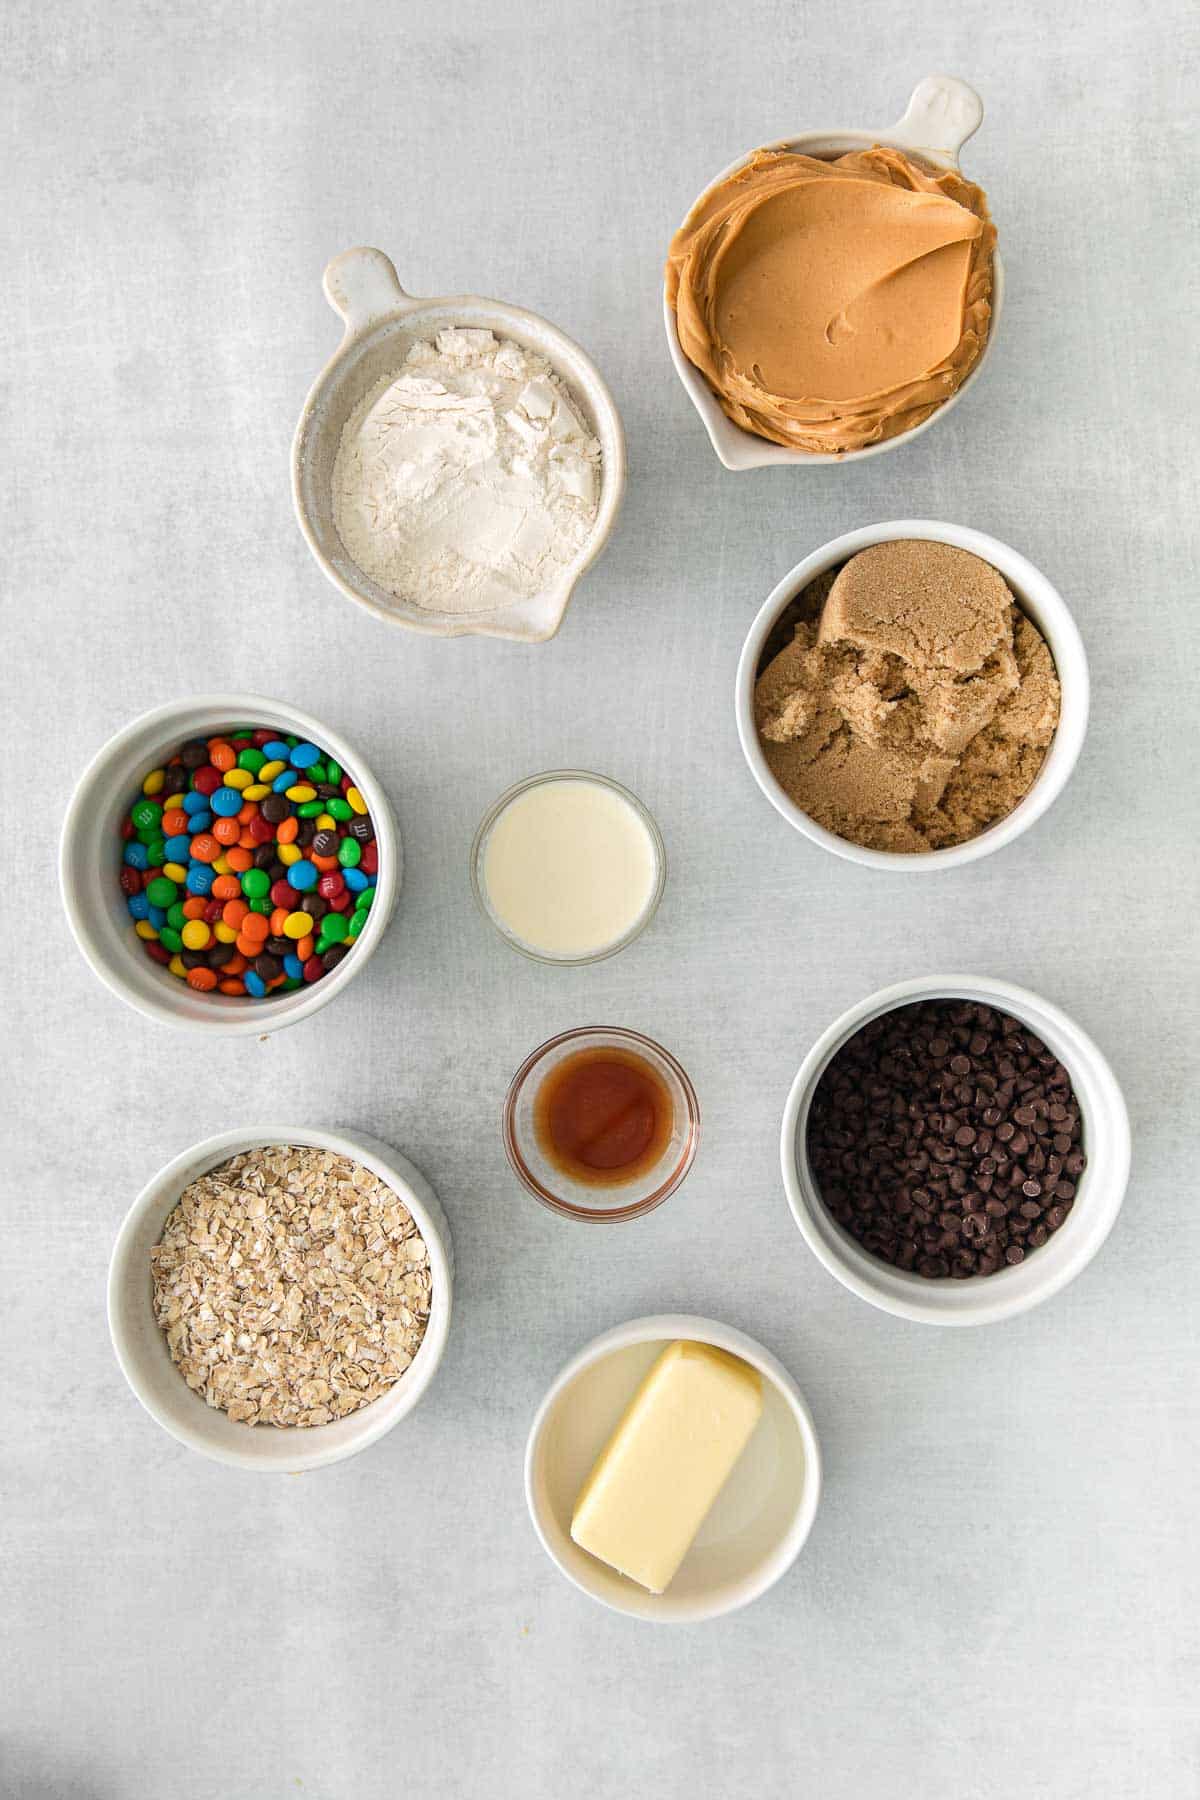 several white bowls with ingredients for monster cookie dough - oats, flour, butter, vanilla extract, peanut butter, chocolate chips, m&m's and milk